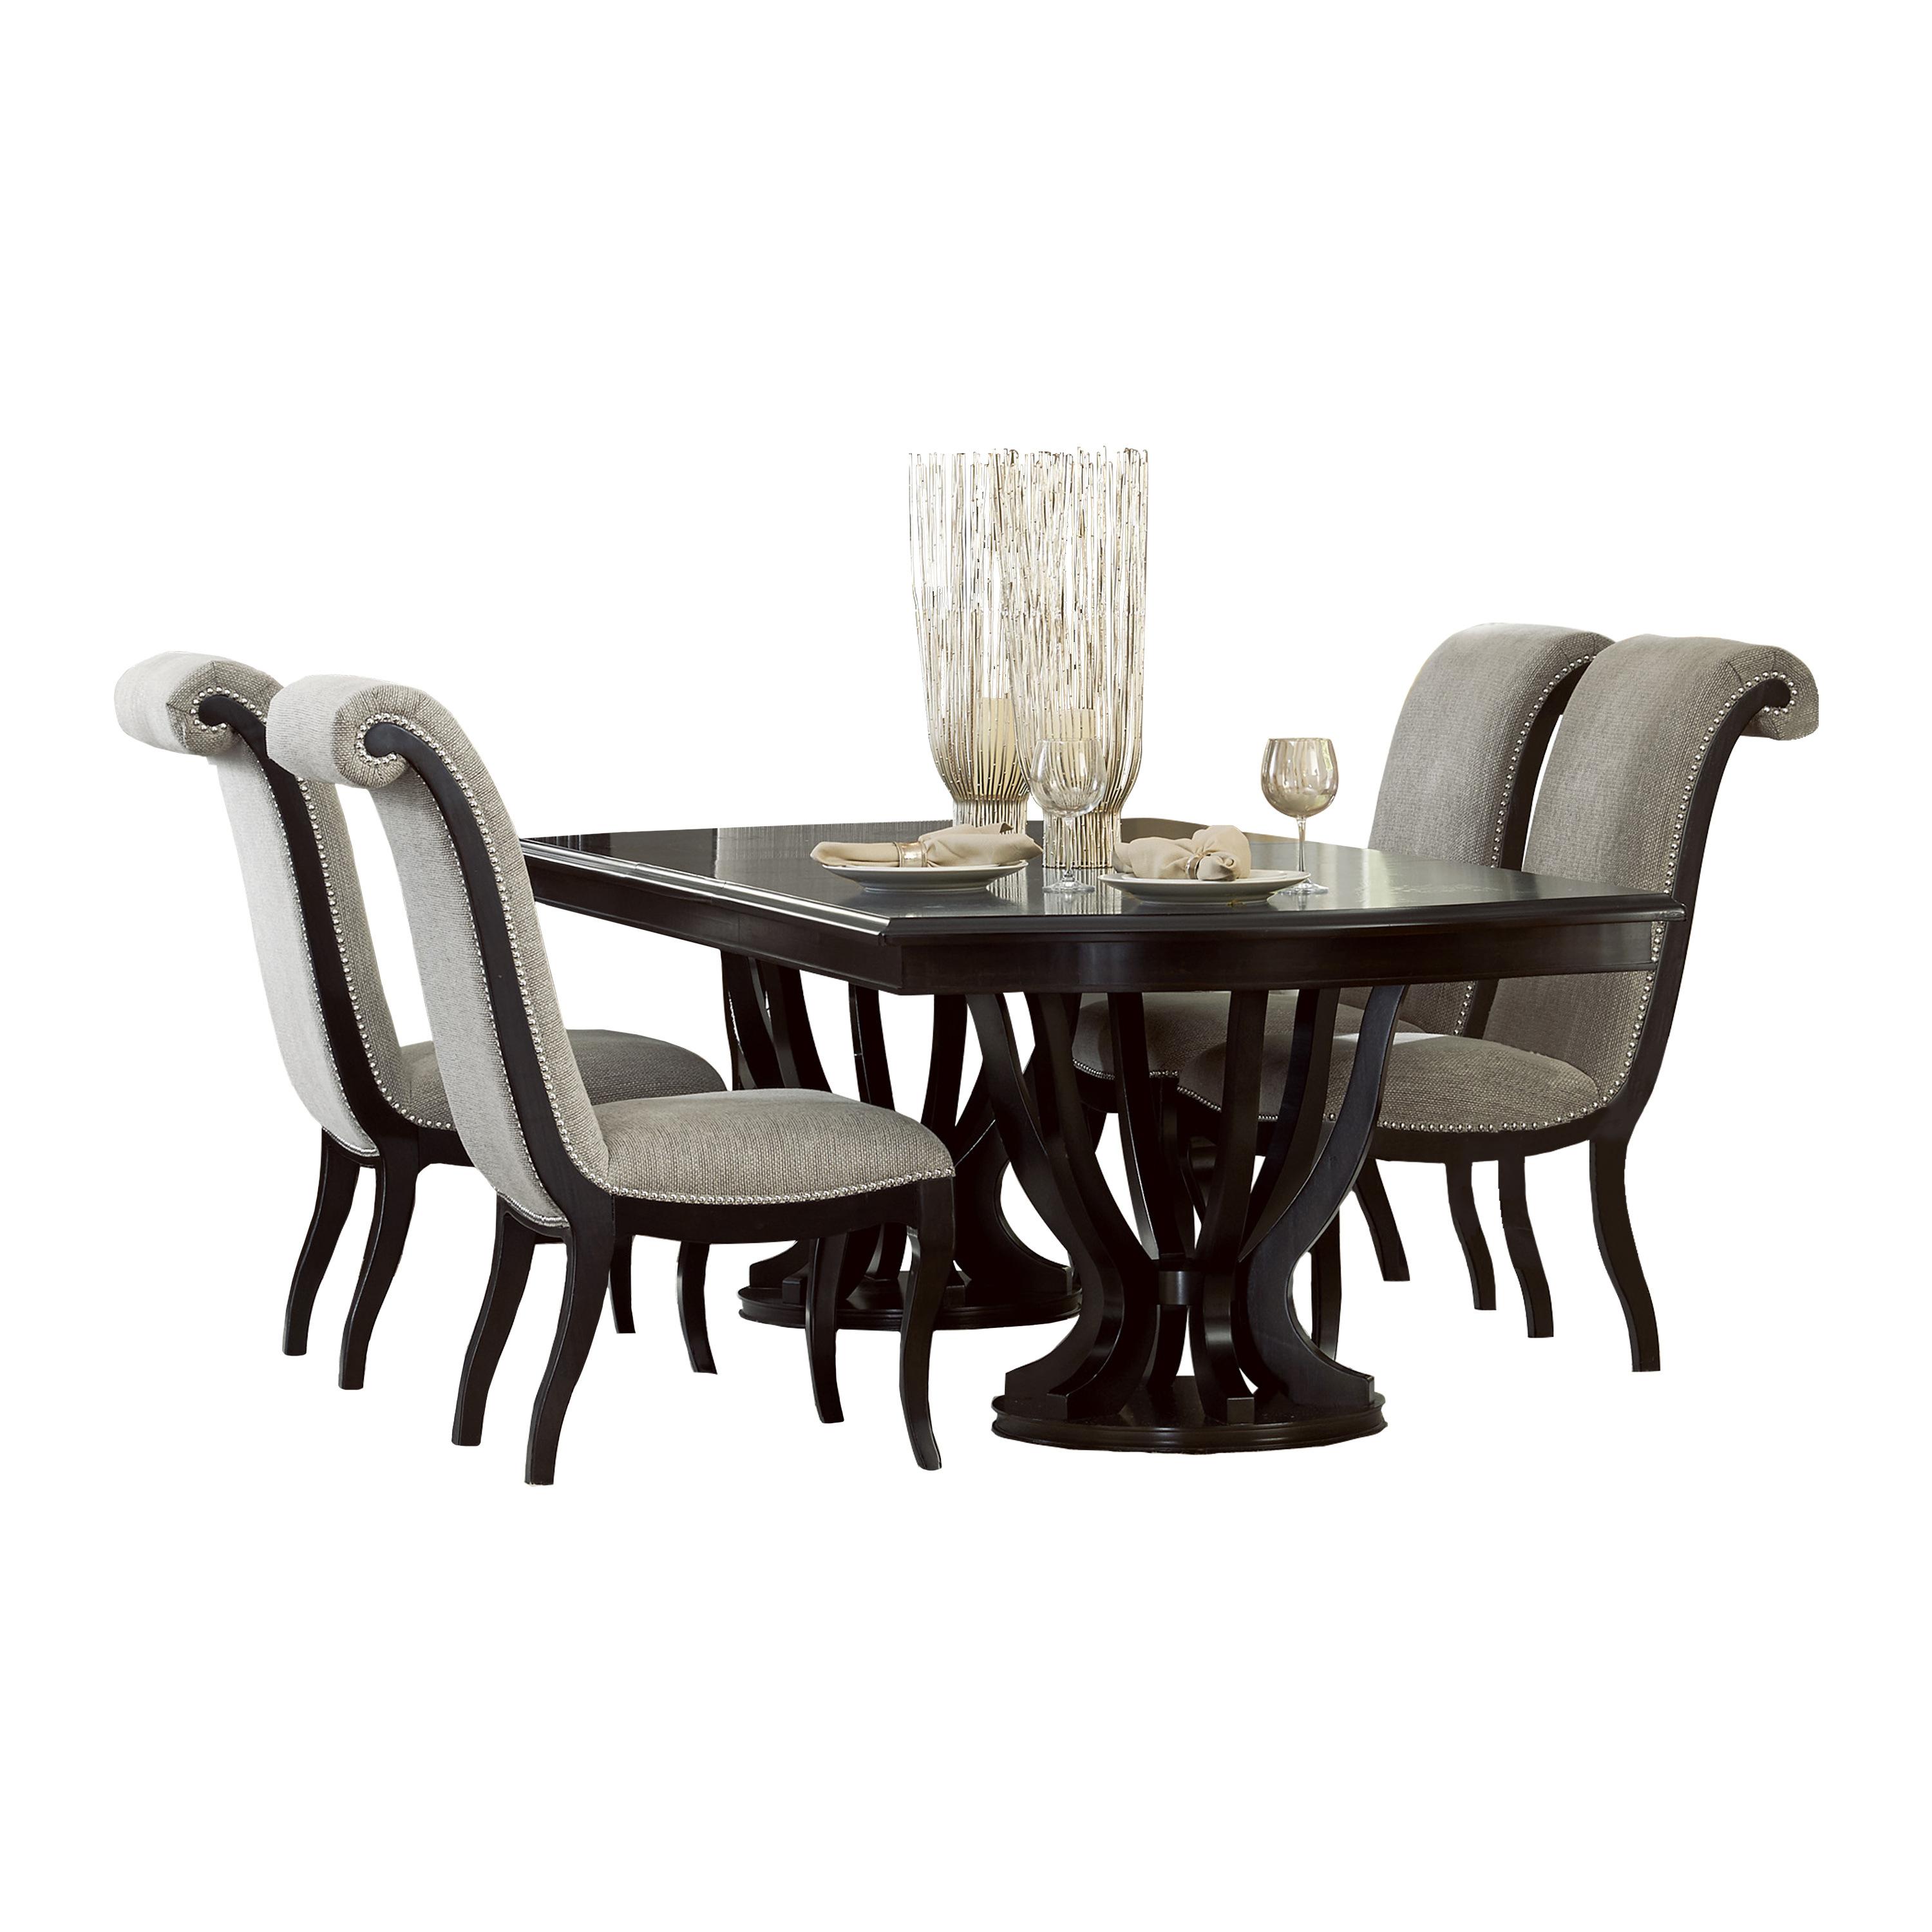 Contemporary Dining Room Set 5494-106*5PC Savion 5494-106*5PC in Espresso Faux Leather